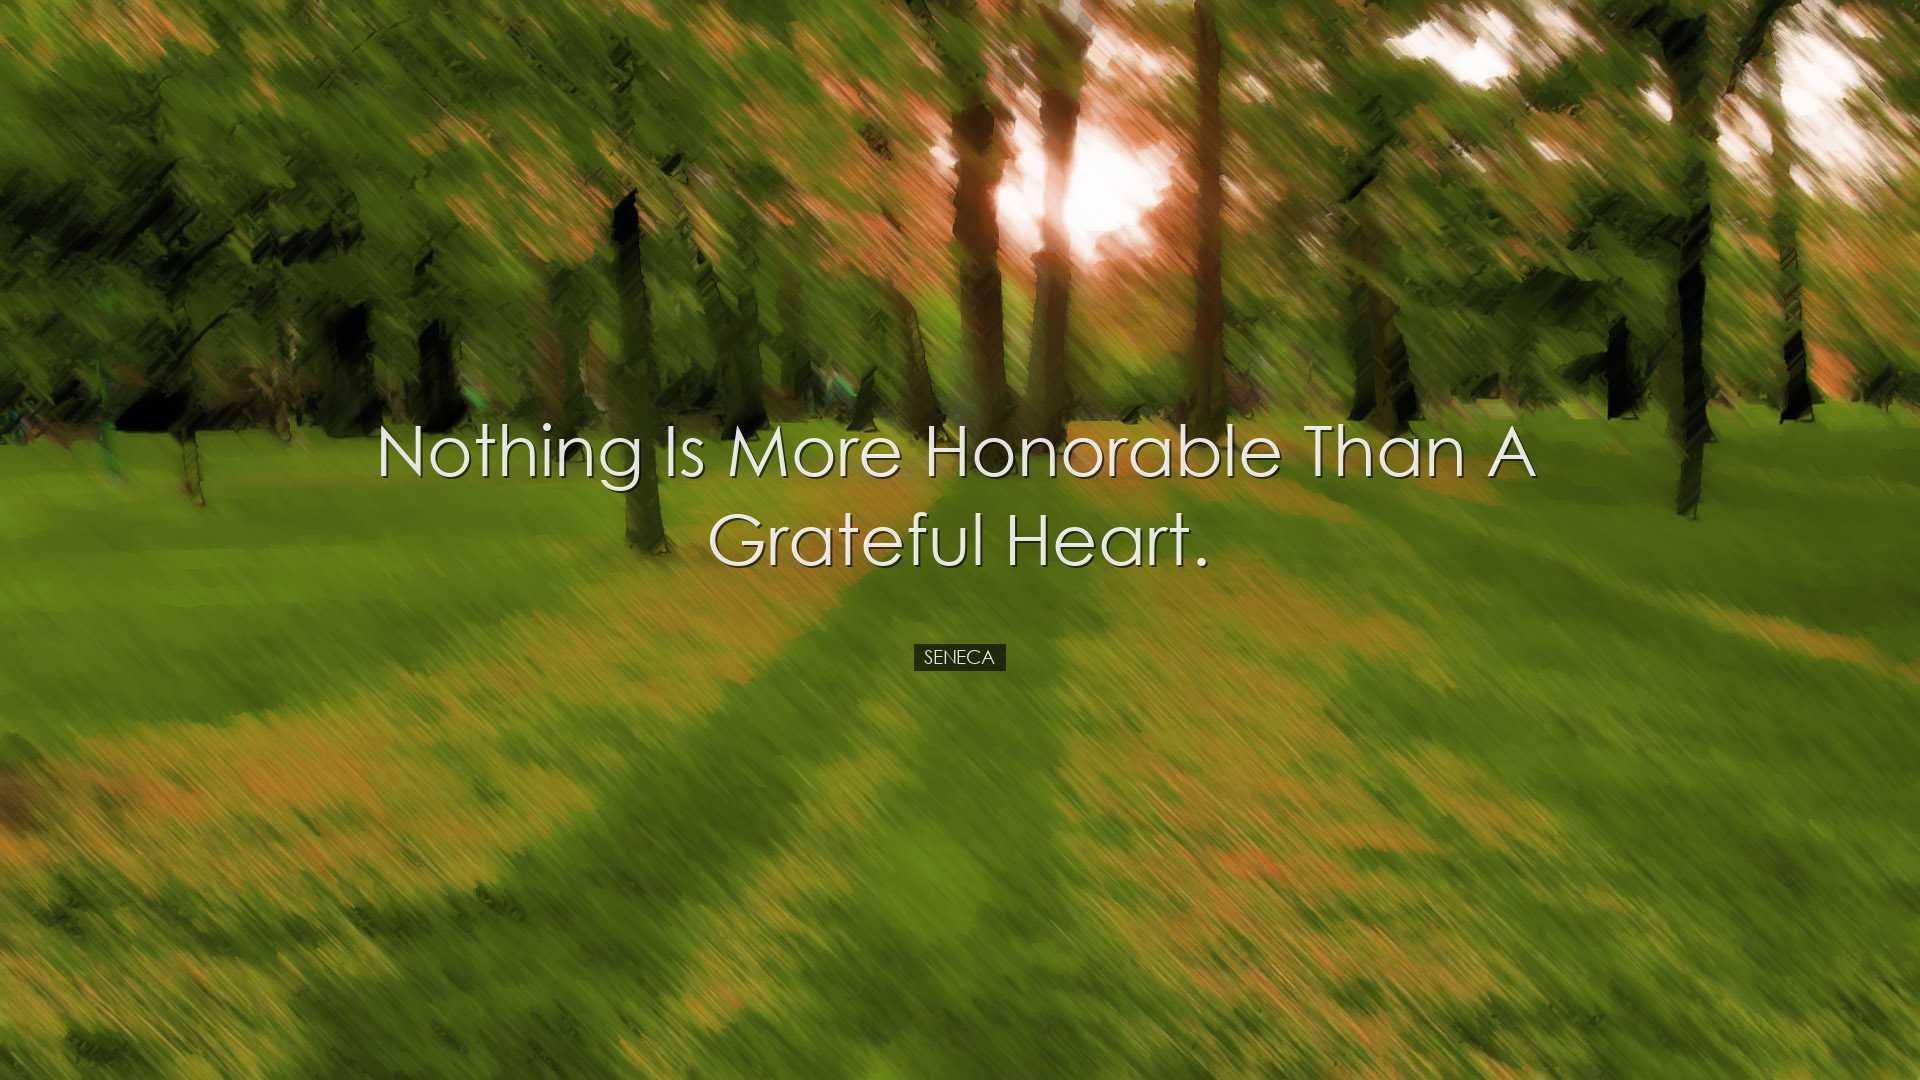 Nothing is more honorable than a grateful heart. - Seneca